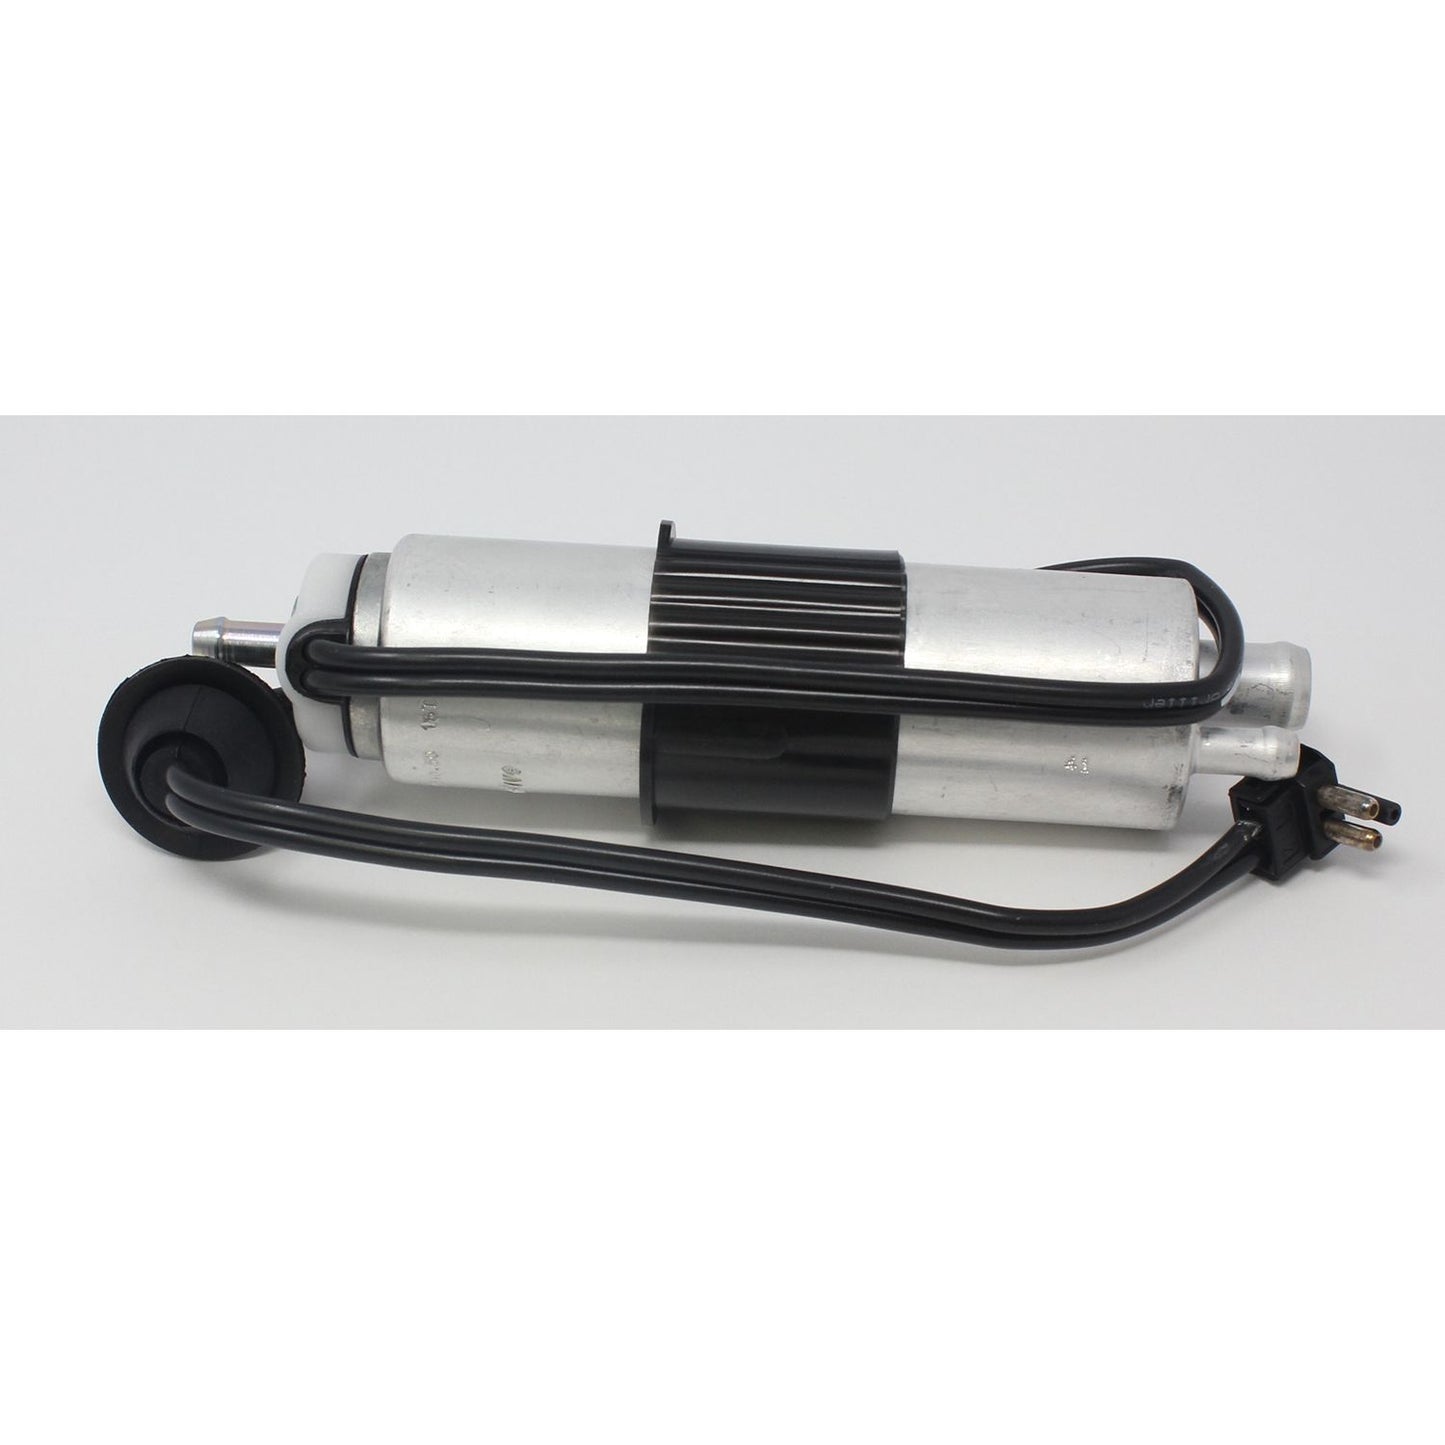 TI Automotive Stock Replacement In-Line Pump Only, Installation Kit Not Included 7.22020.50